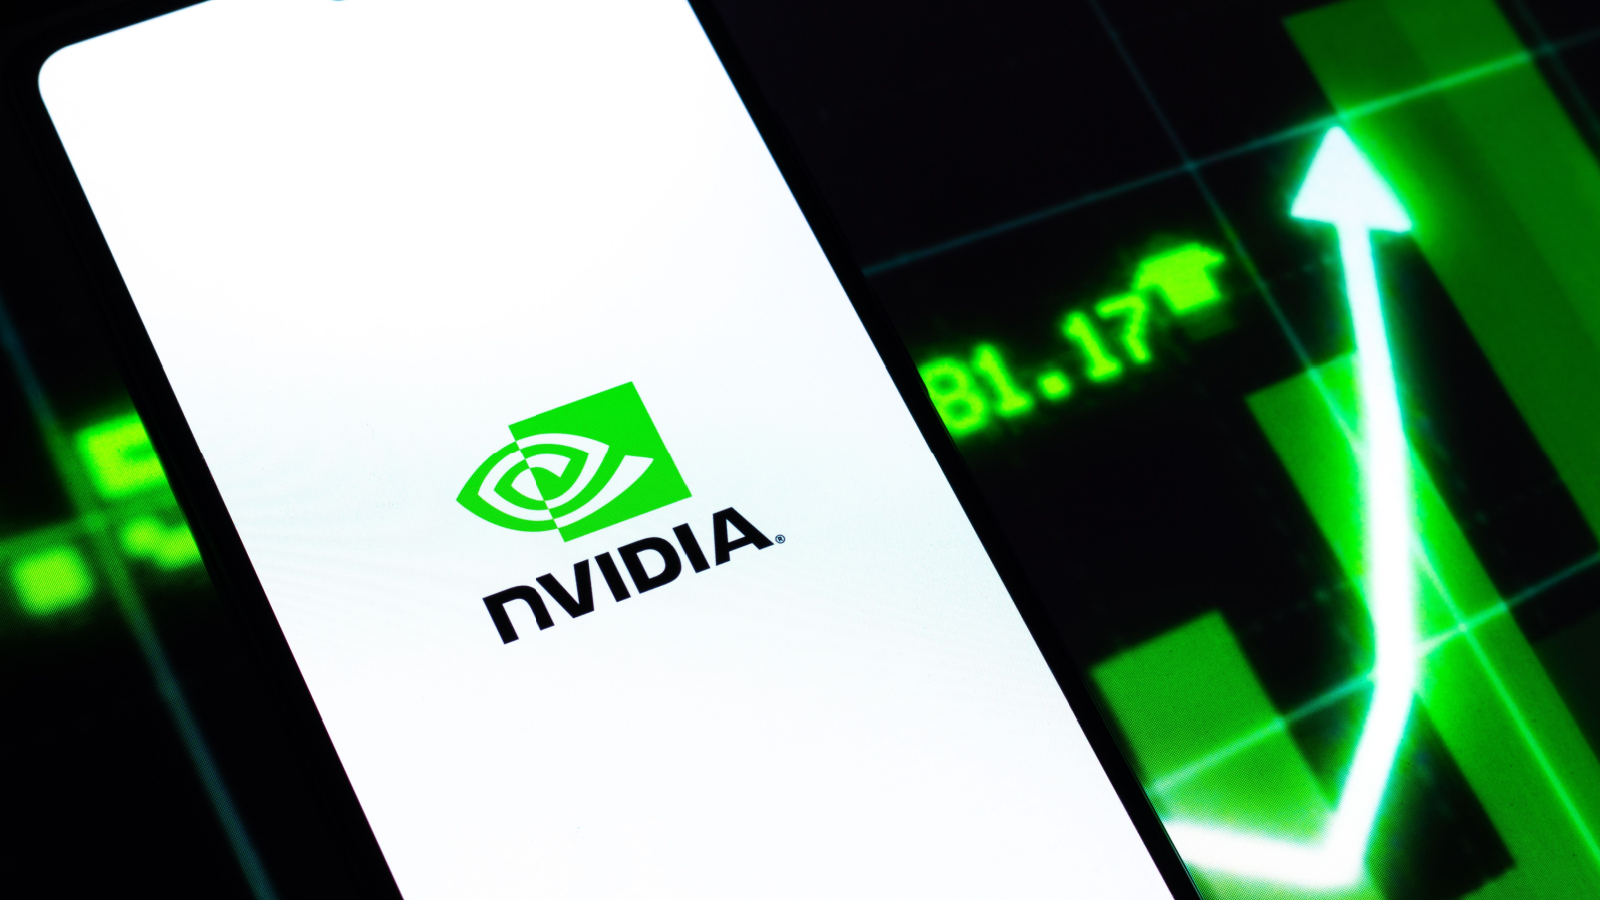 Nvidia is on the verge of entering the $1 trillion club, propelled by a surge driven by artificial intelligence (AI).